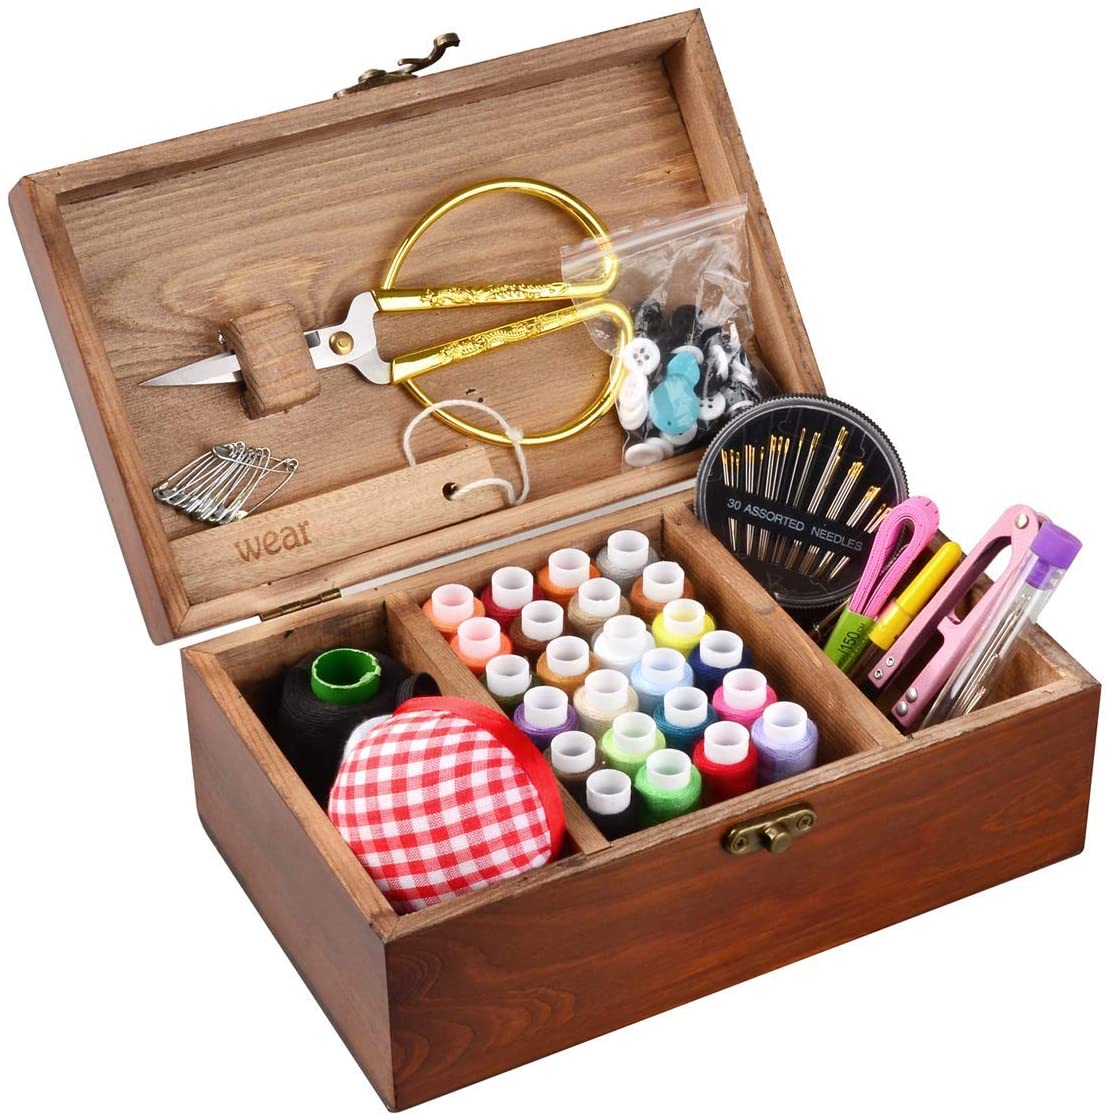 Sewing Kit with Wooden Box, Complete Hand Sewing Kit, Needle Threader Sewing  Supplies for Adults Teenagers Beginners 